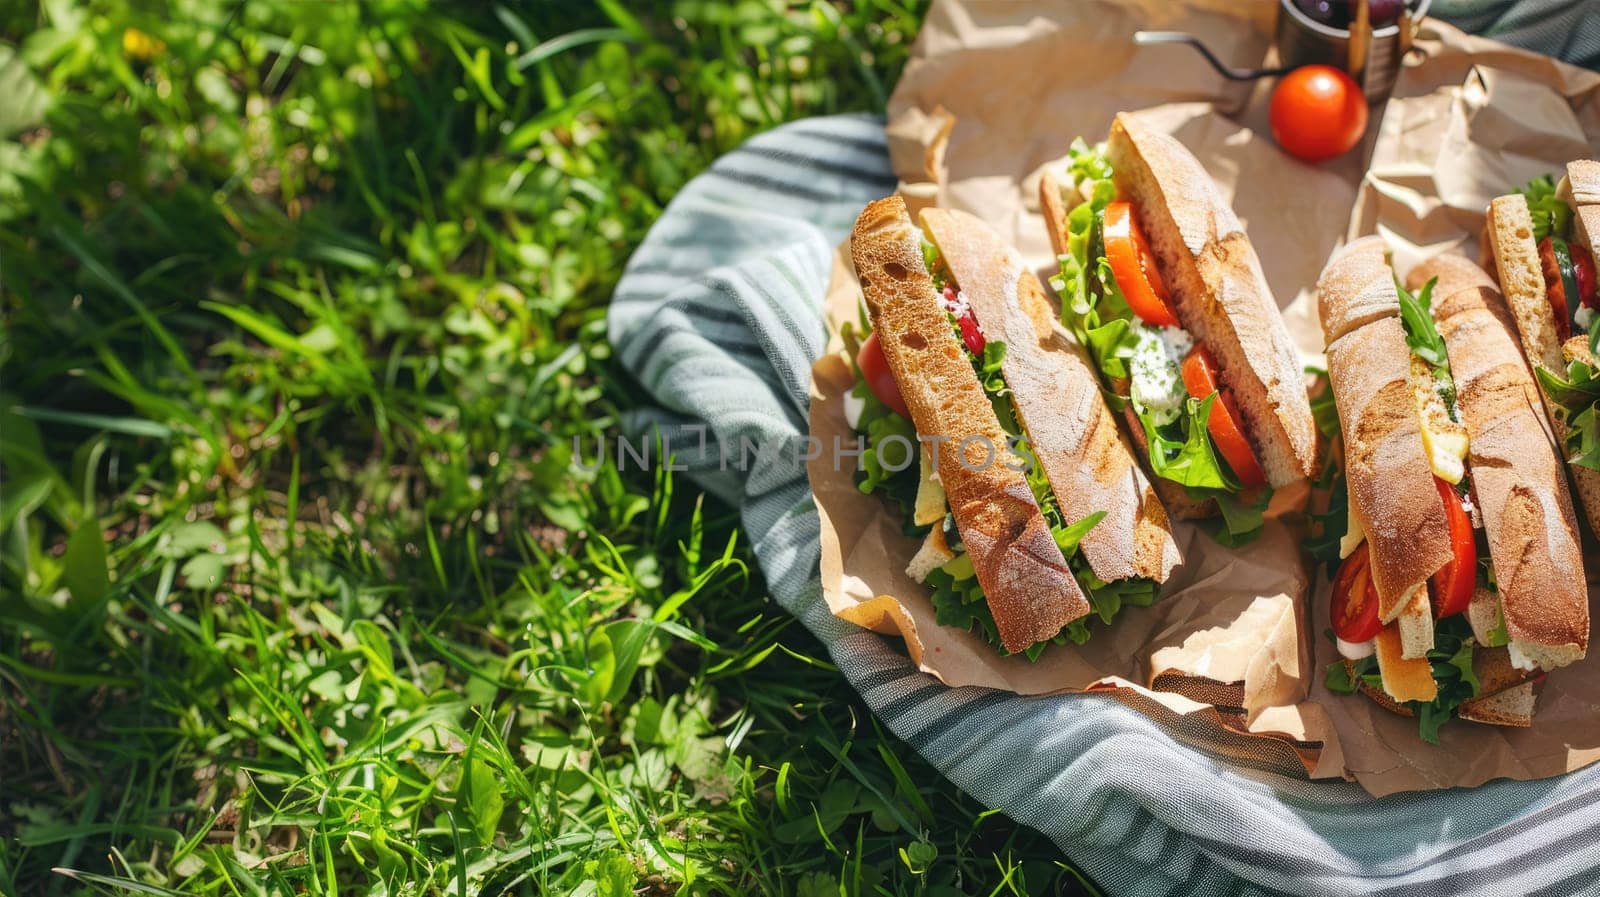 Fresh tasty sandwiches on craft paper on a blanket on the grass by natali_brill